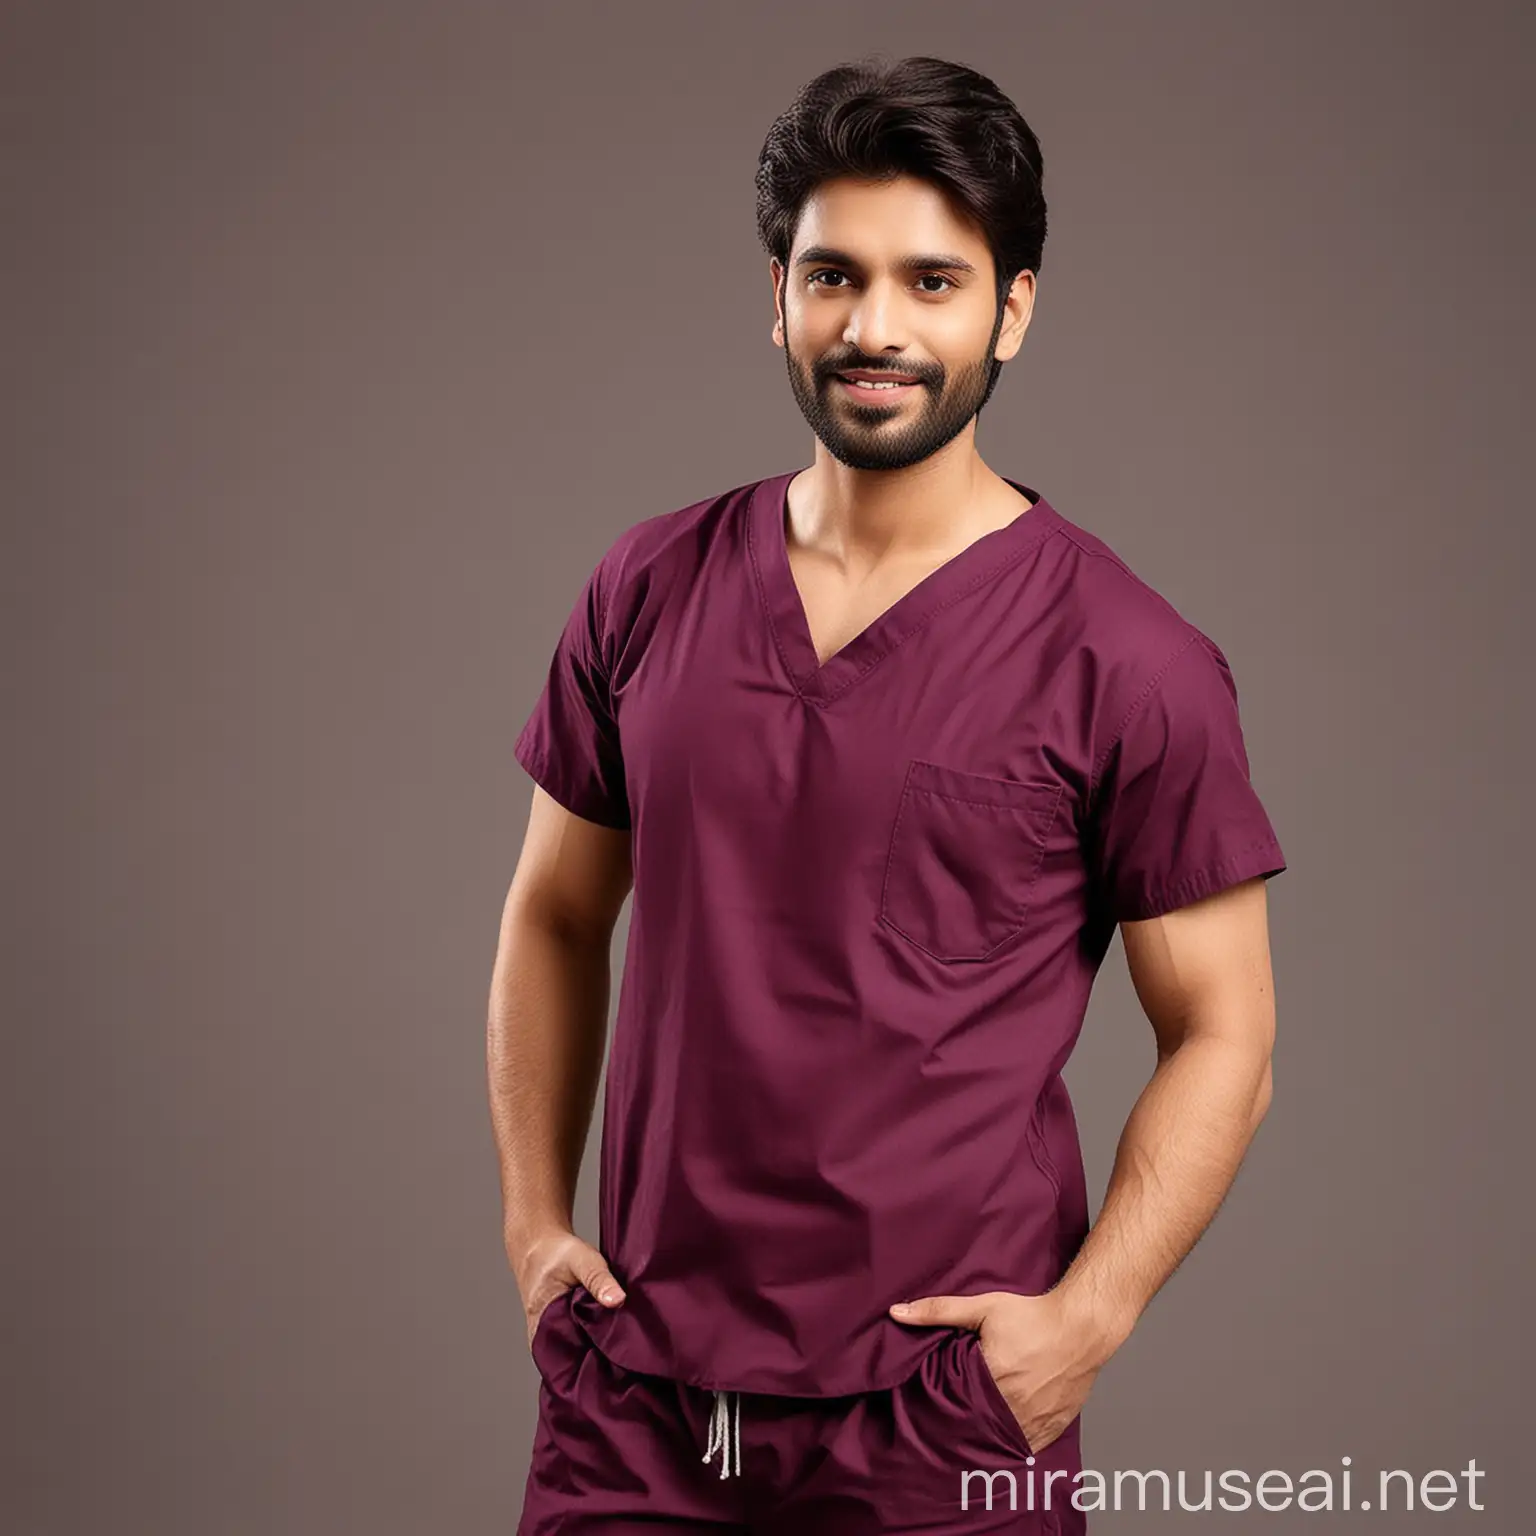 generate doctor scrub set images, stylish with indian male model full images, wine color